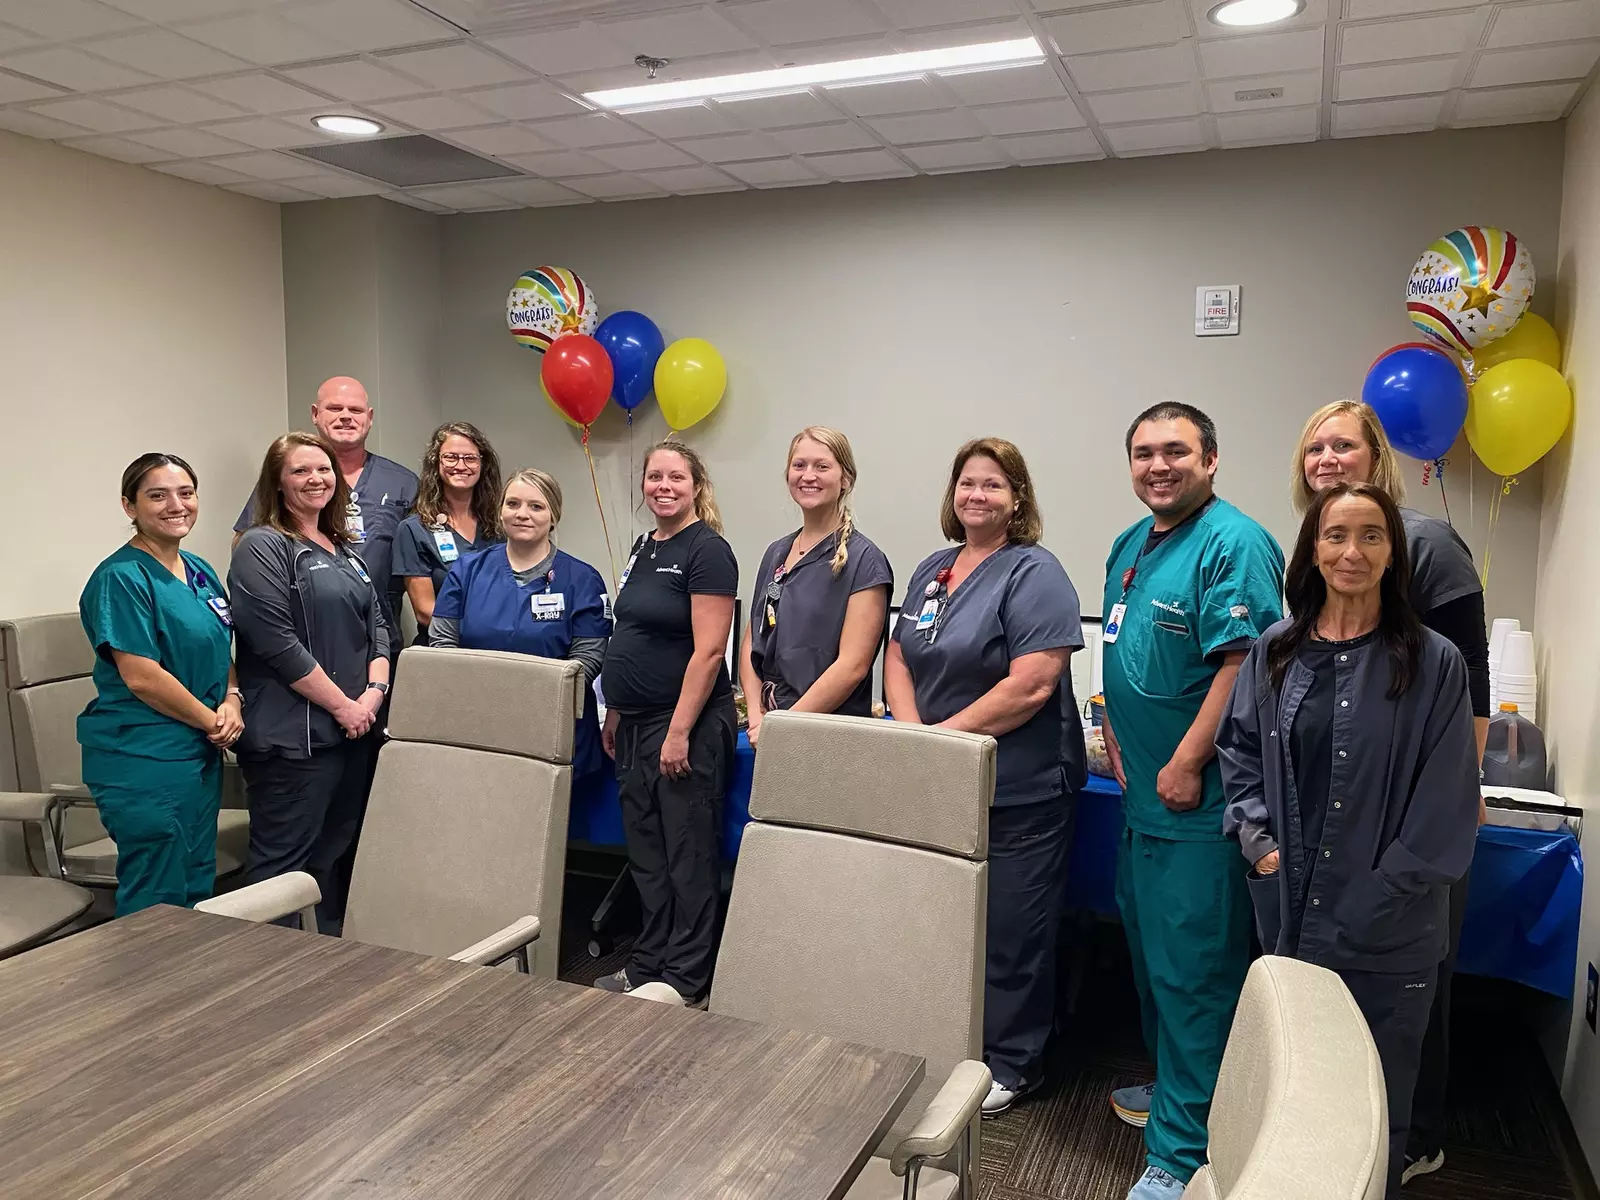 The AdventHealth Gordon radiology department has achieved accreditation from the American College of Radiology (ACR) for the imaging departments 